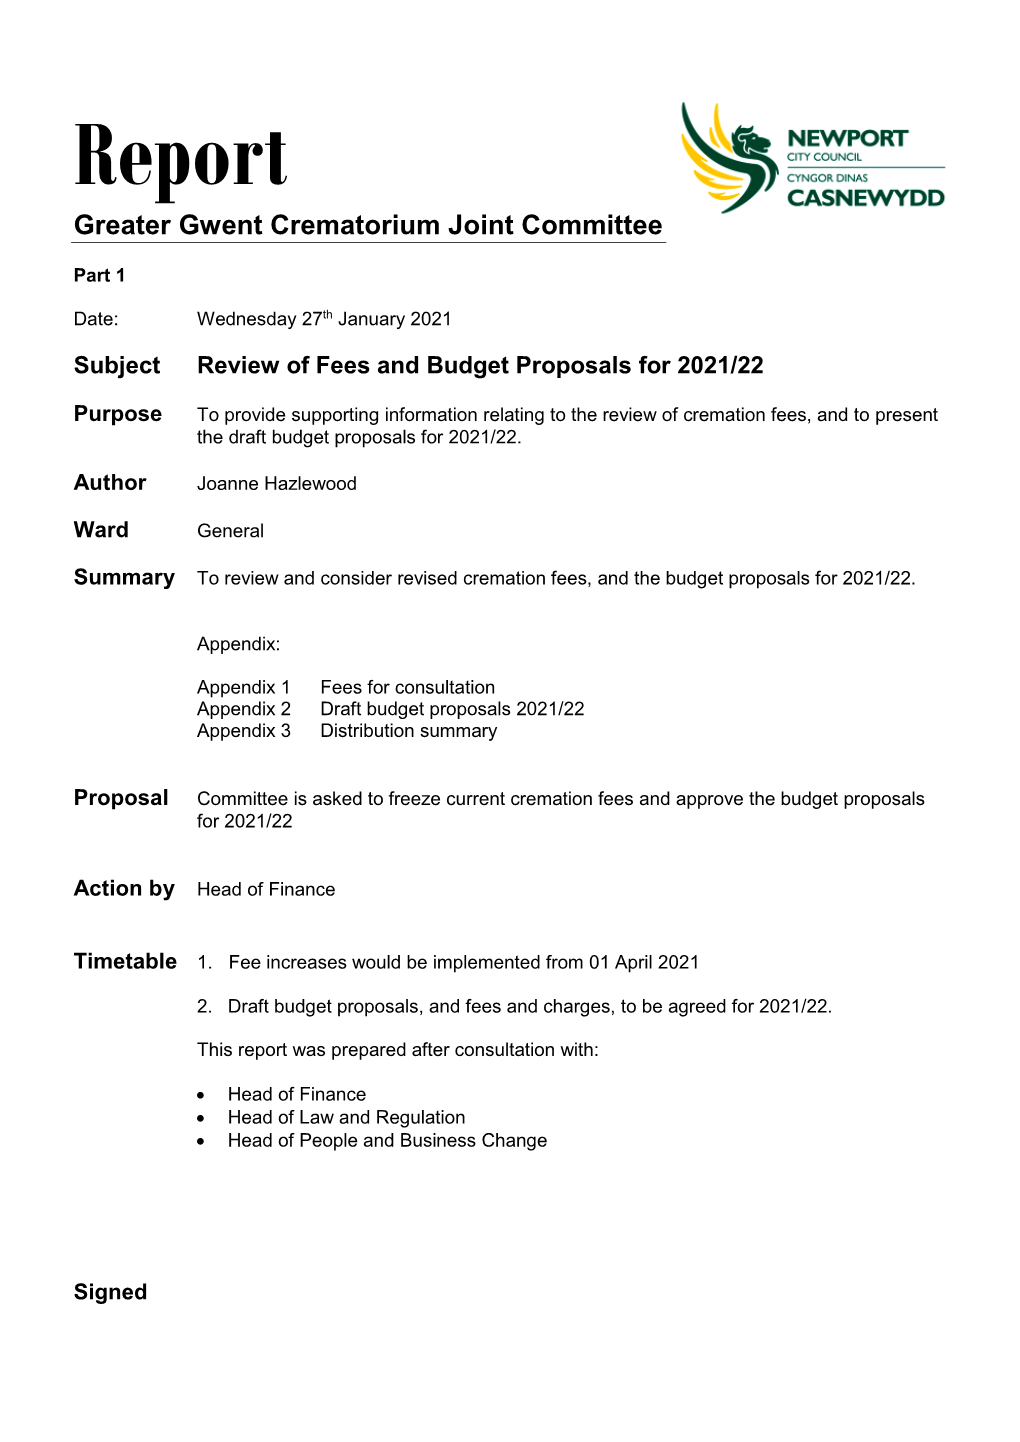 Report Greater Gwent Crematorium Joint Committee